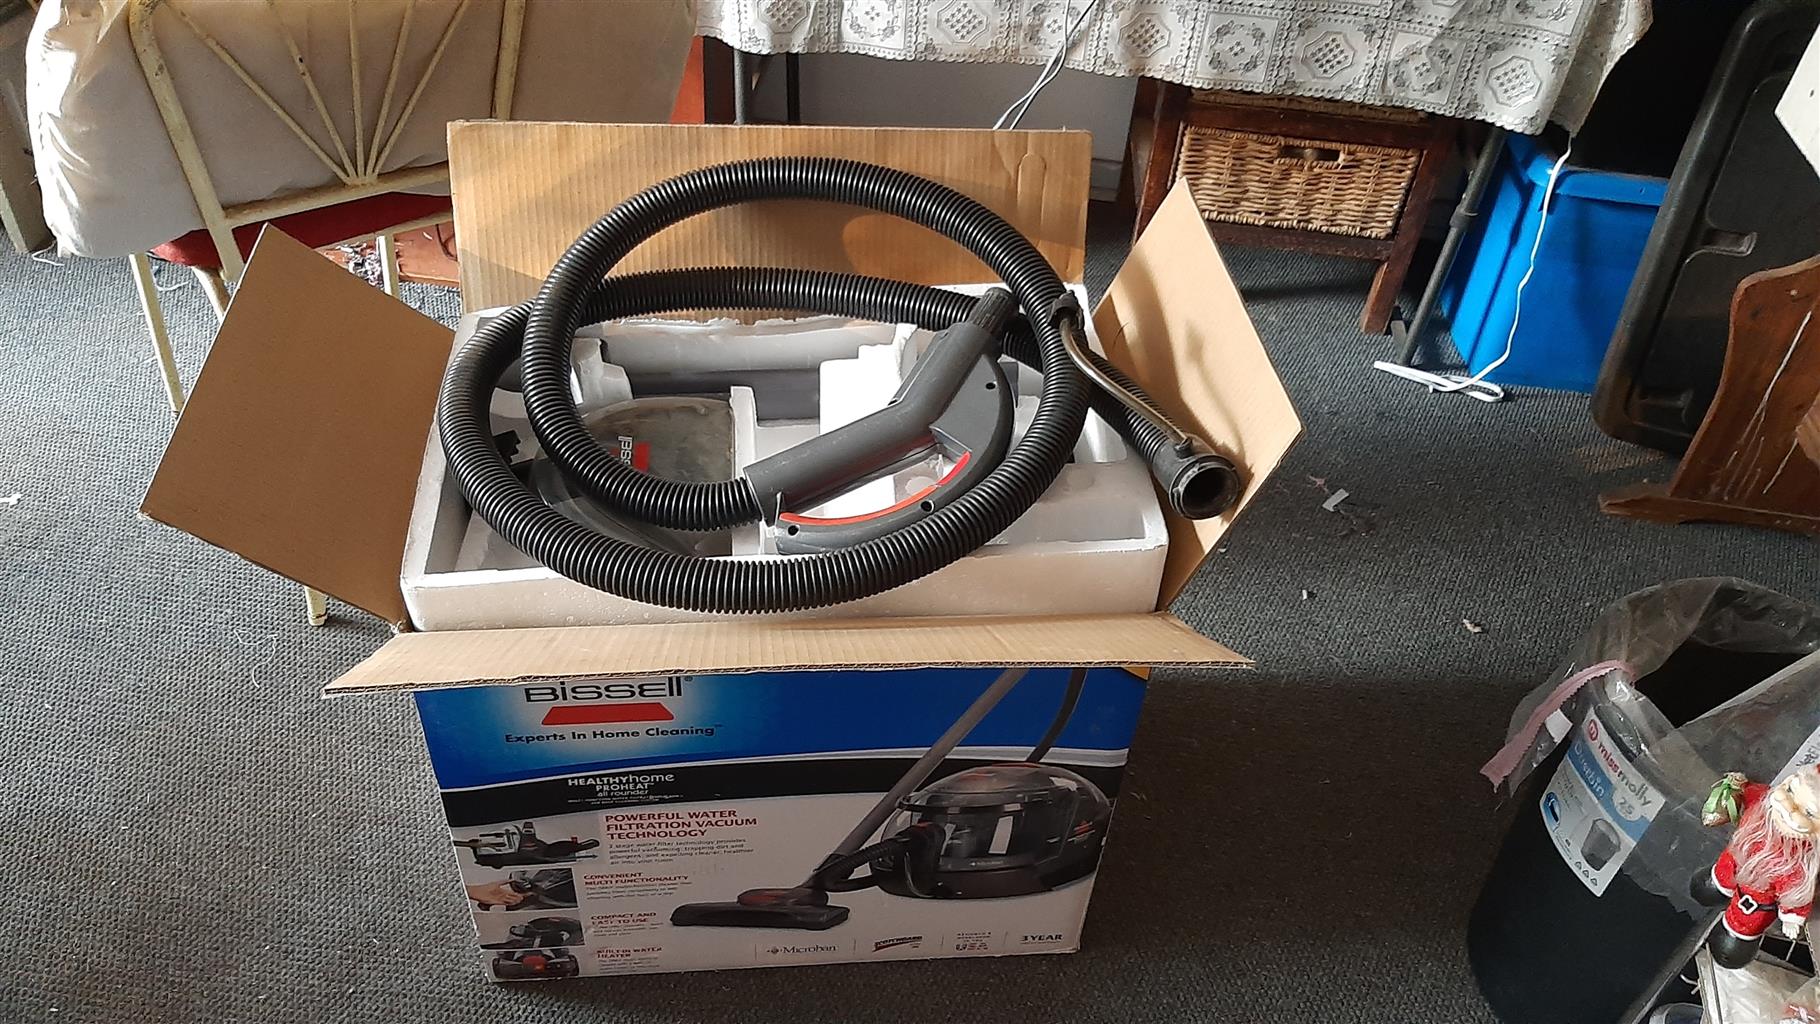 Bissell carpet washer and facuum cleaner 